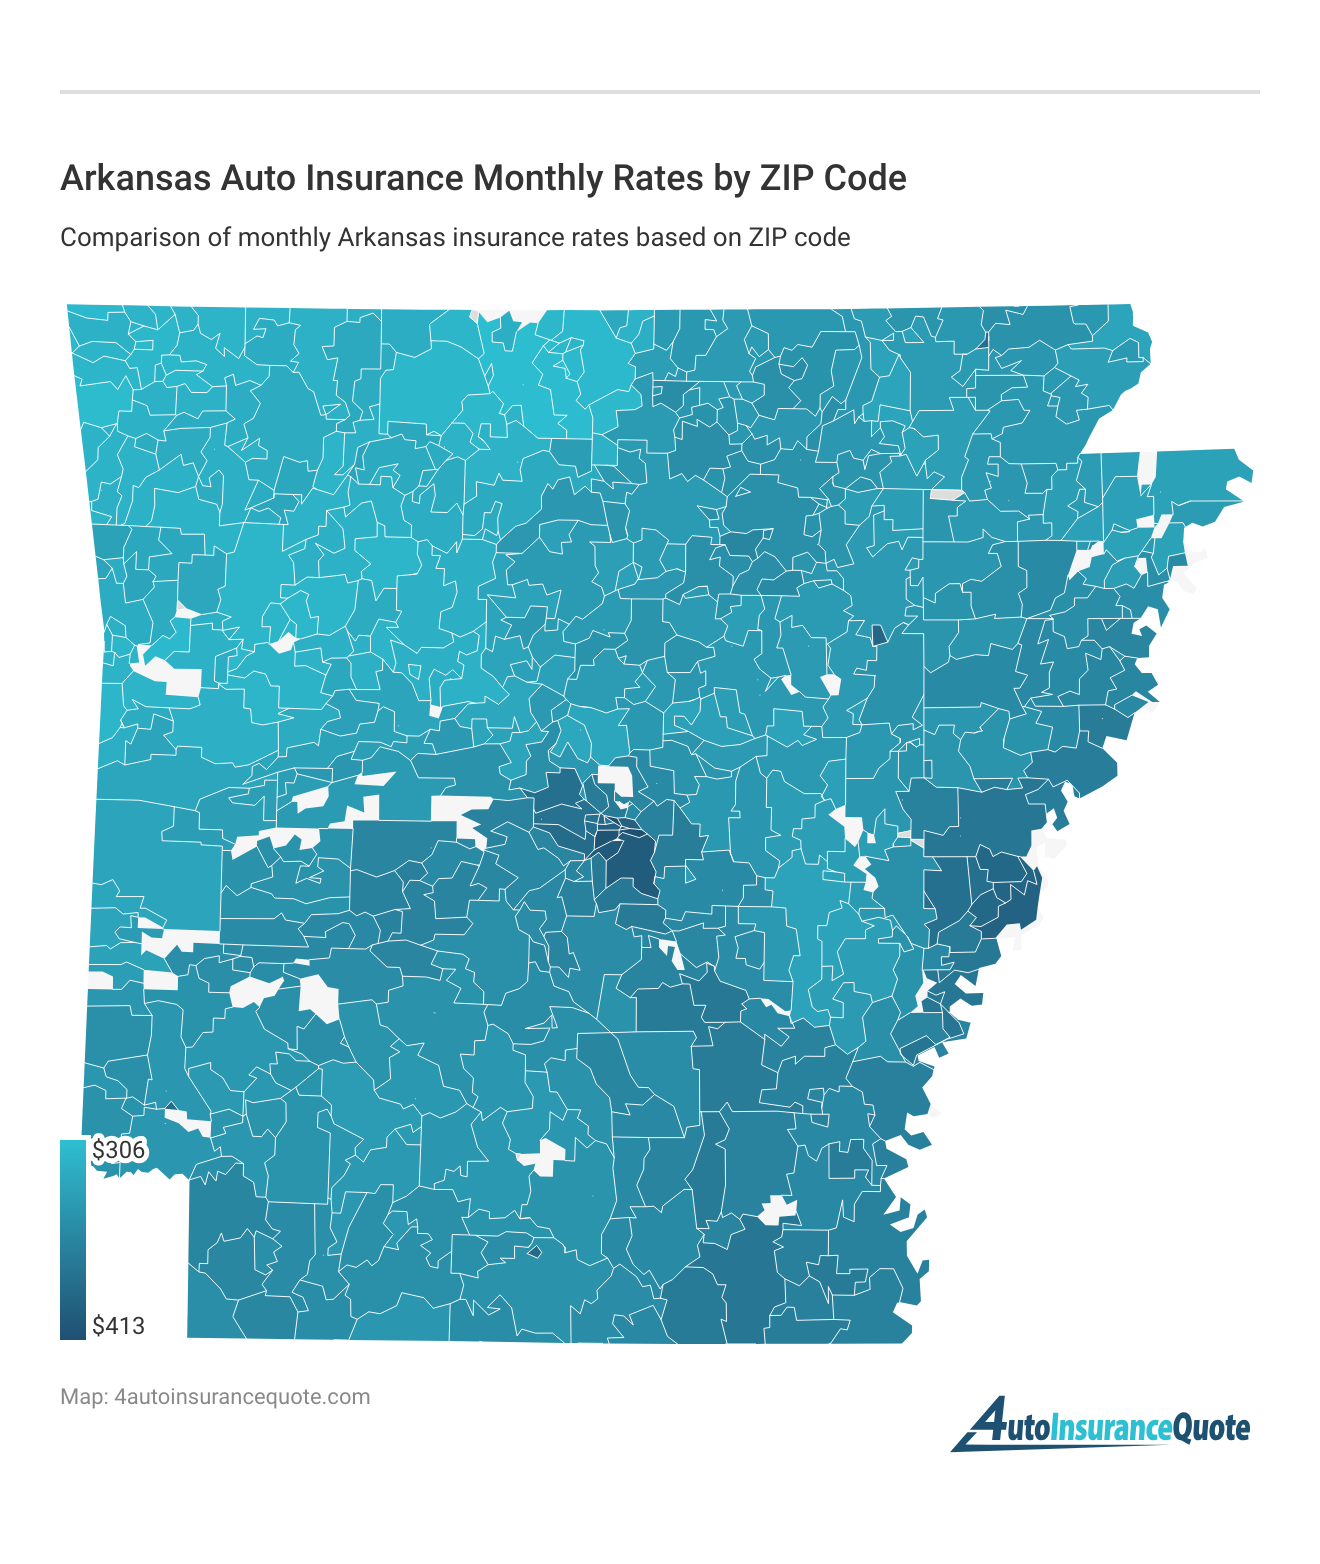 <h3>Arkansas Auto Insurance Monthly Rates by ZIP Code</h3>